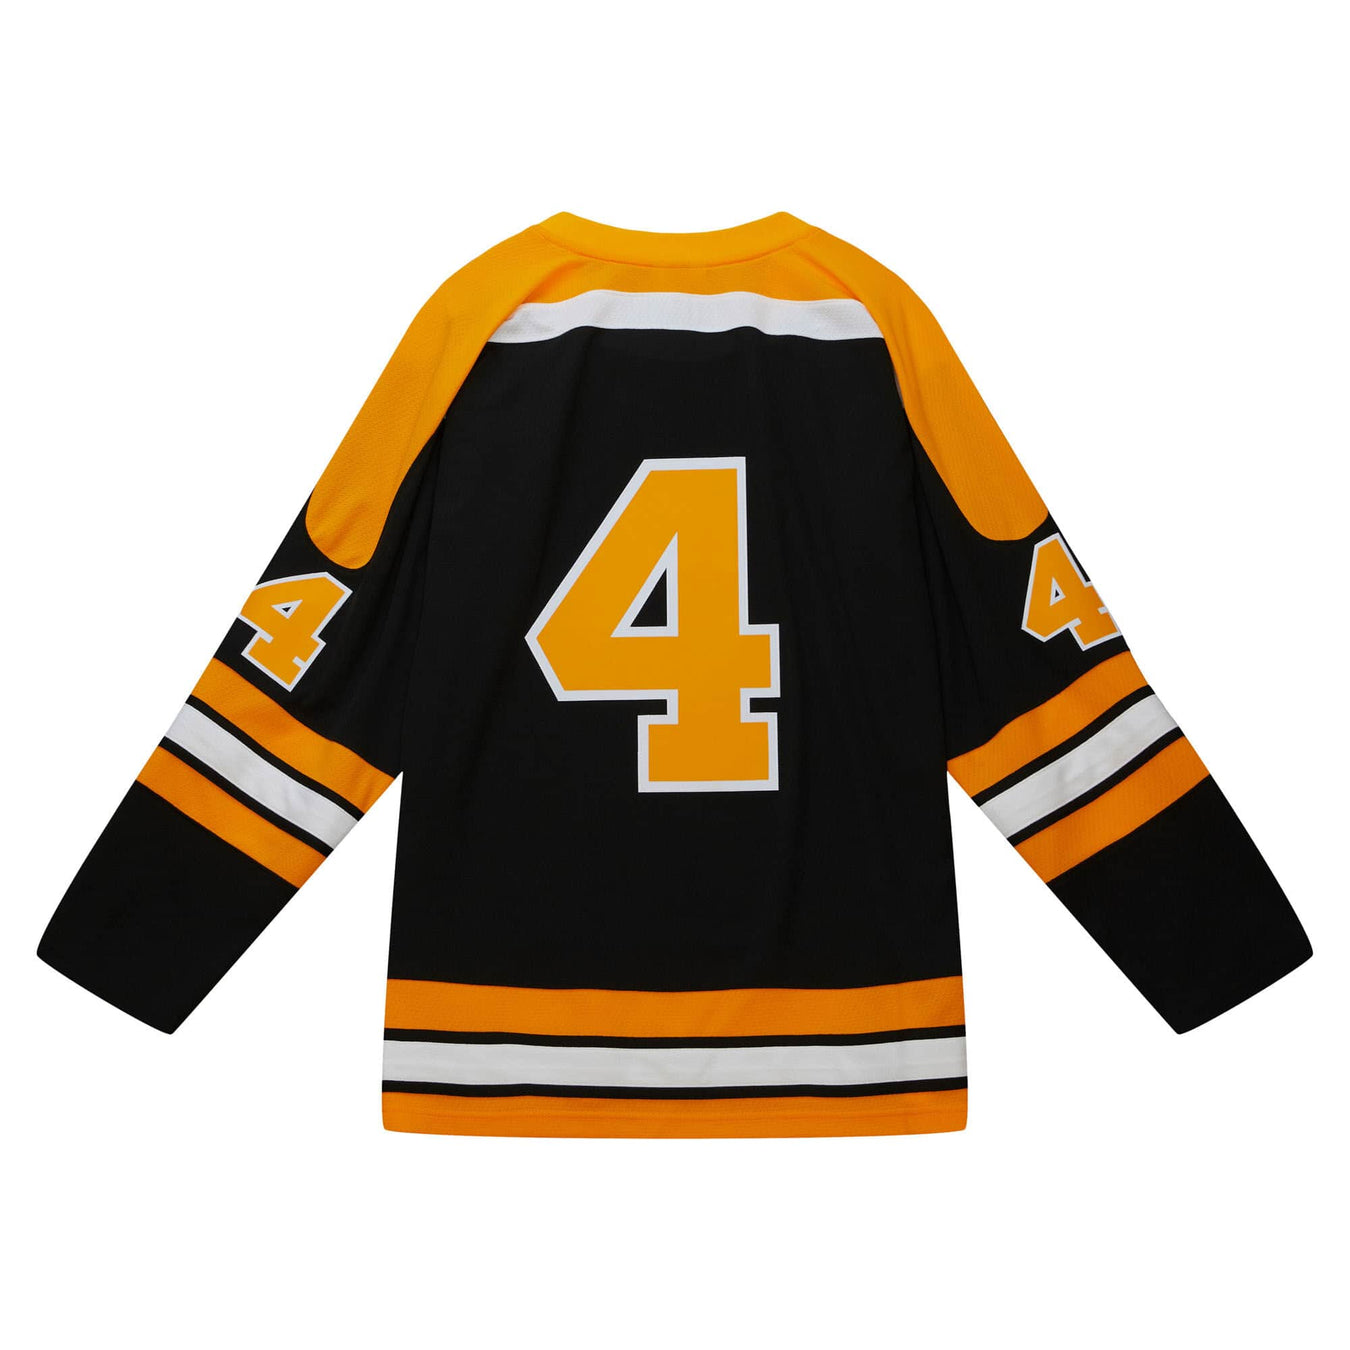 Bobby Orr NHL Jerseys, Apparel and Collectibles